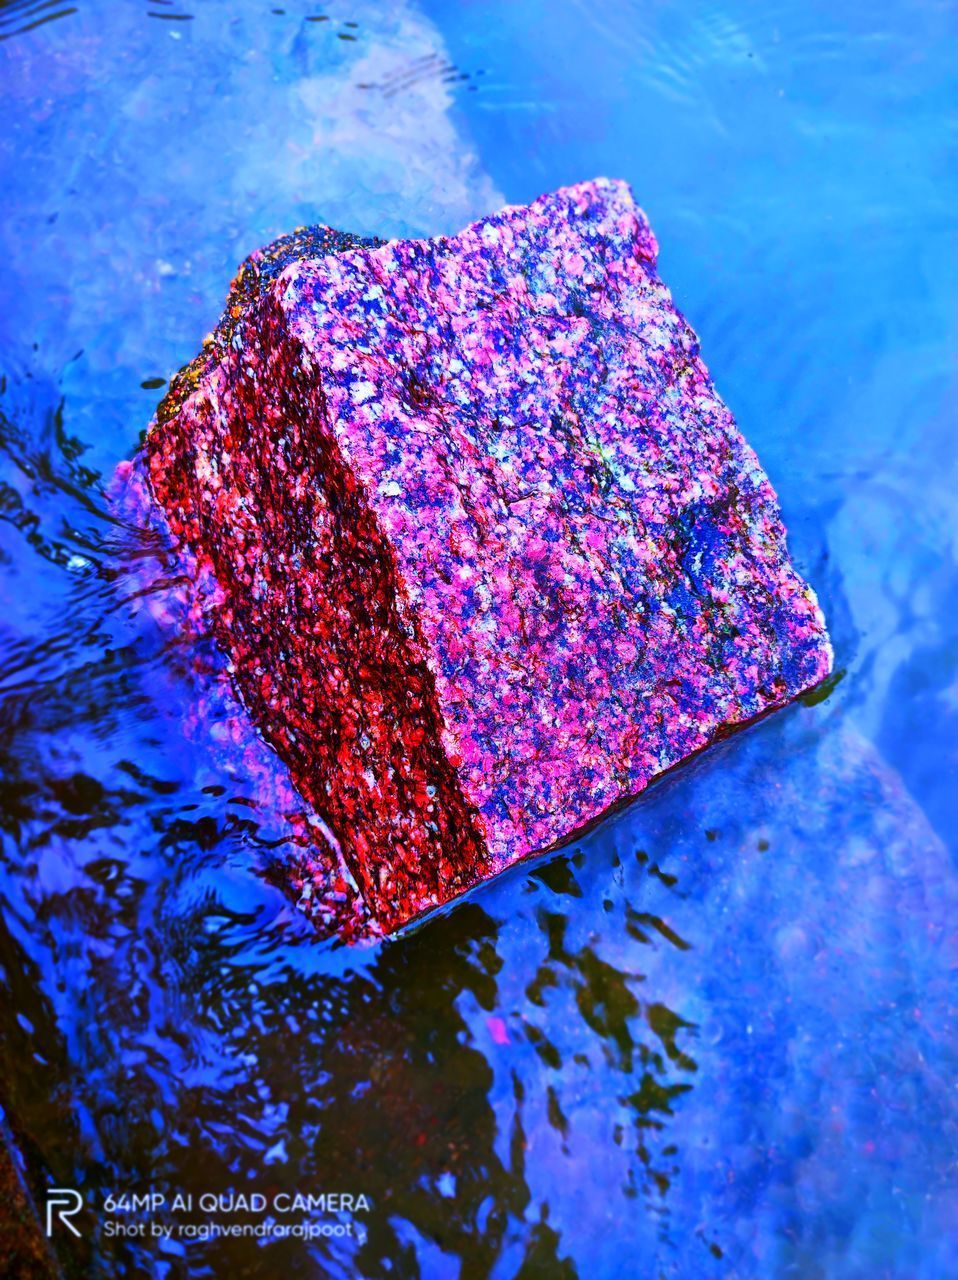 CLOSE-UP OF WATER ON ROCK